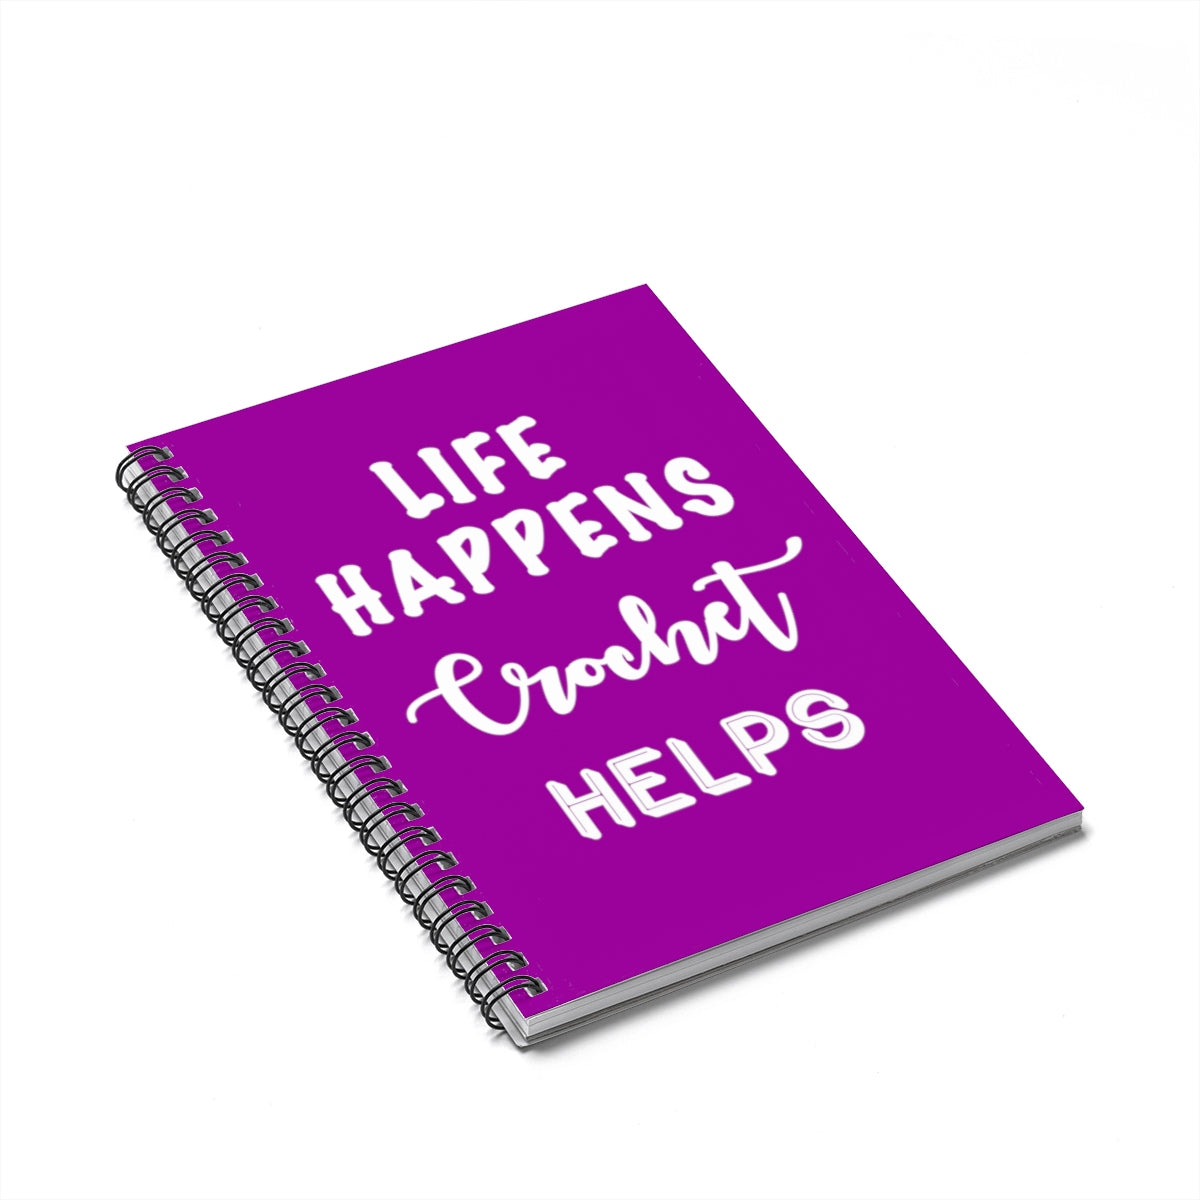 "Life Happens, Crochet Helps" White Letters - Spiral Notebook - Ruled Line